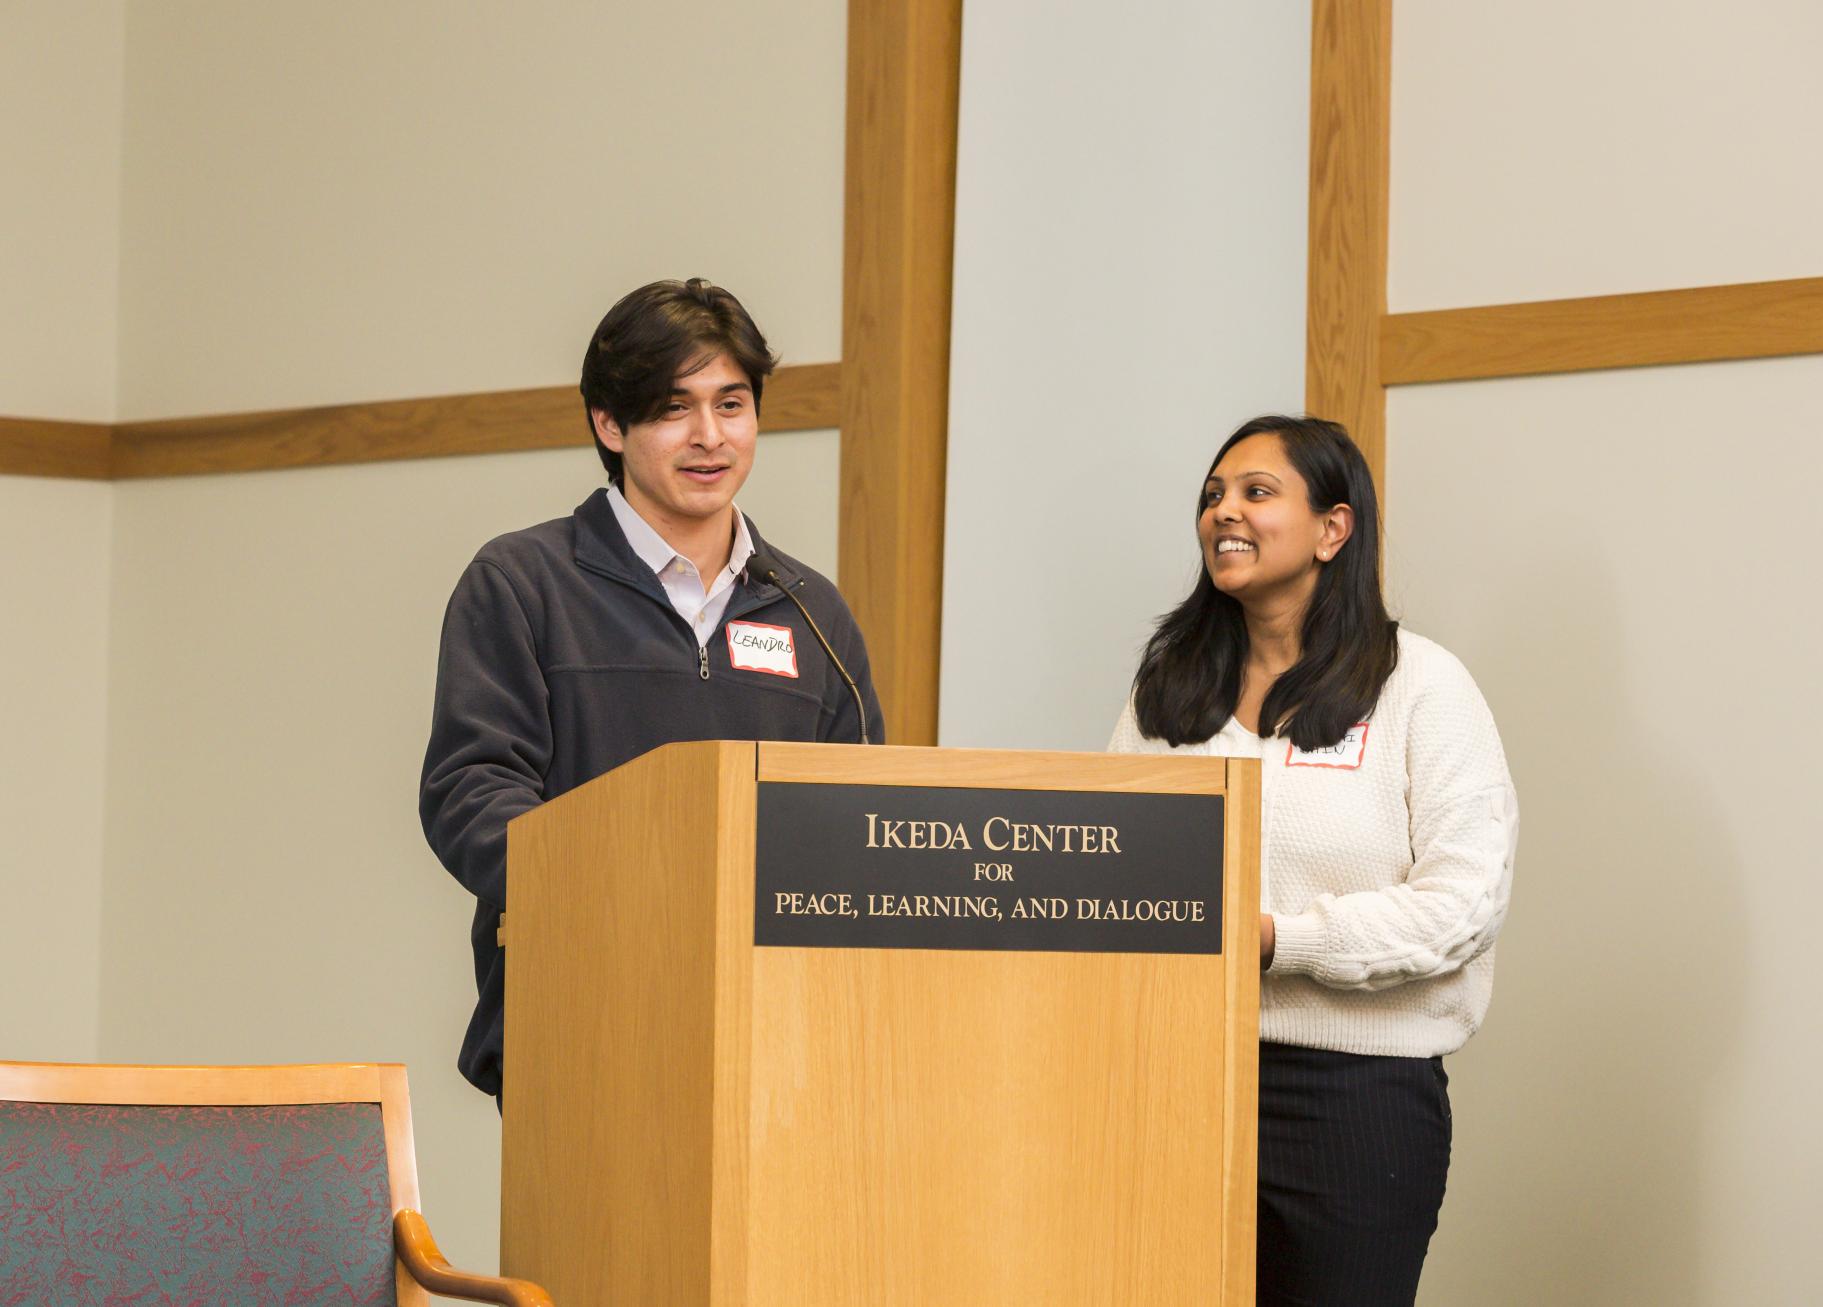 Former Youth Committee Members Leandro Molina and Prachi Jain